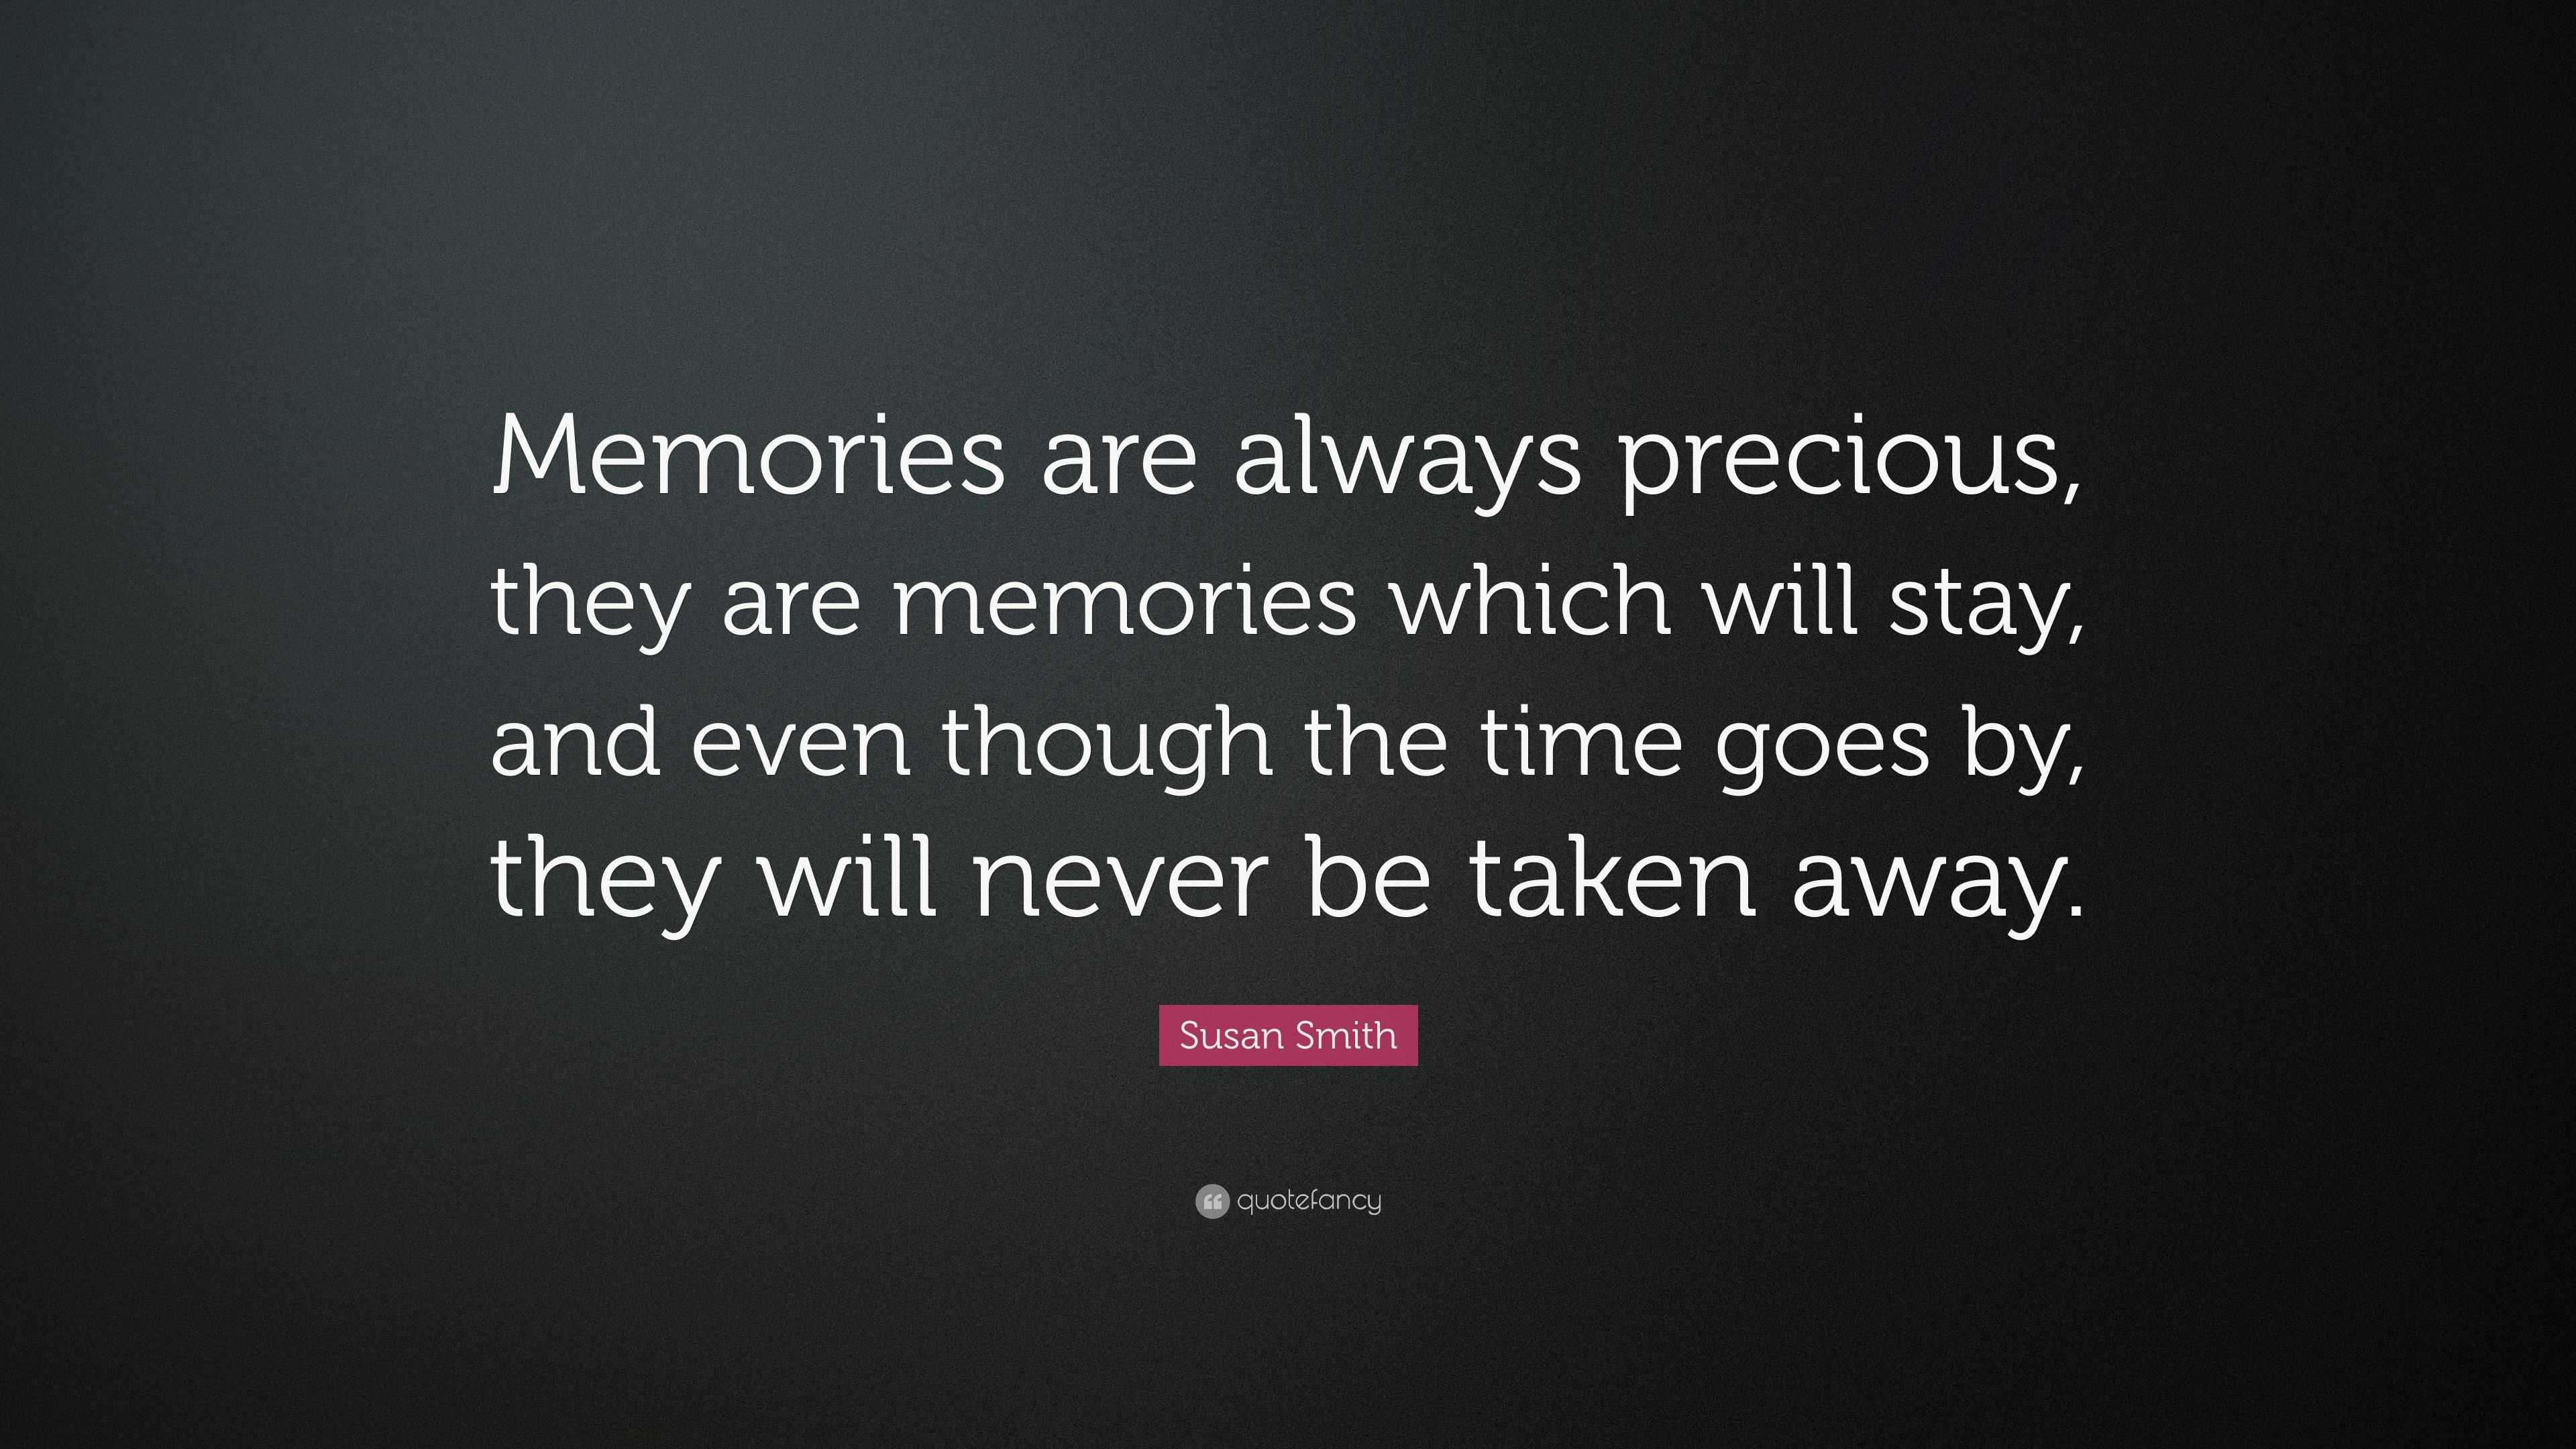 Susan Smith Quote: “Memories are always precious, they are memories ...